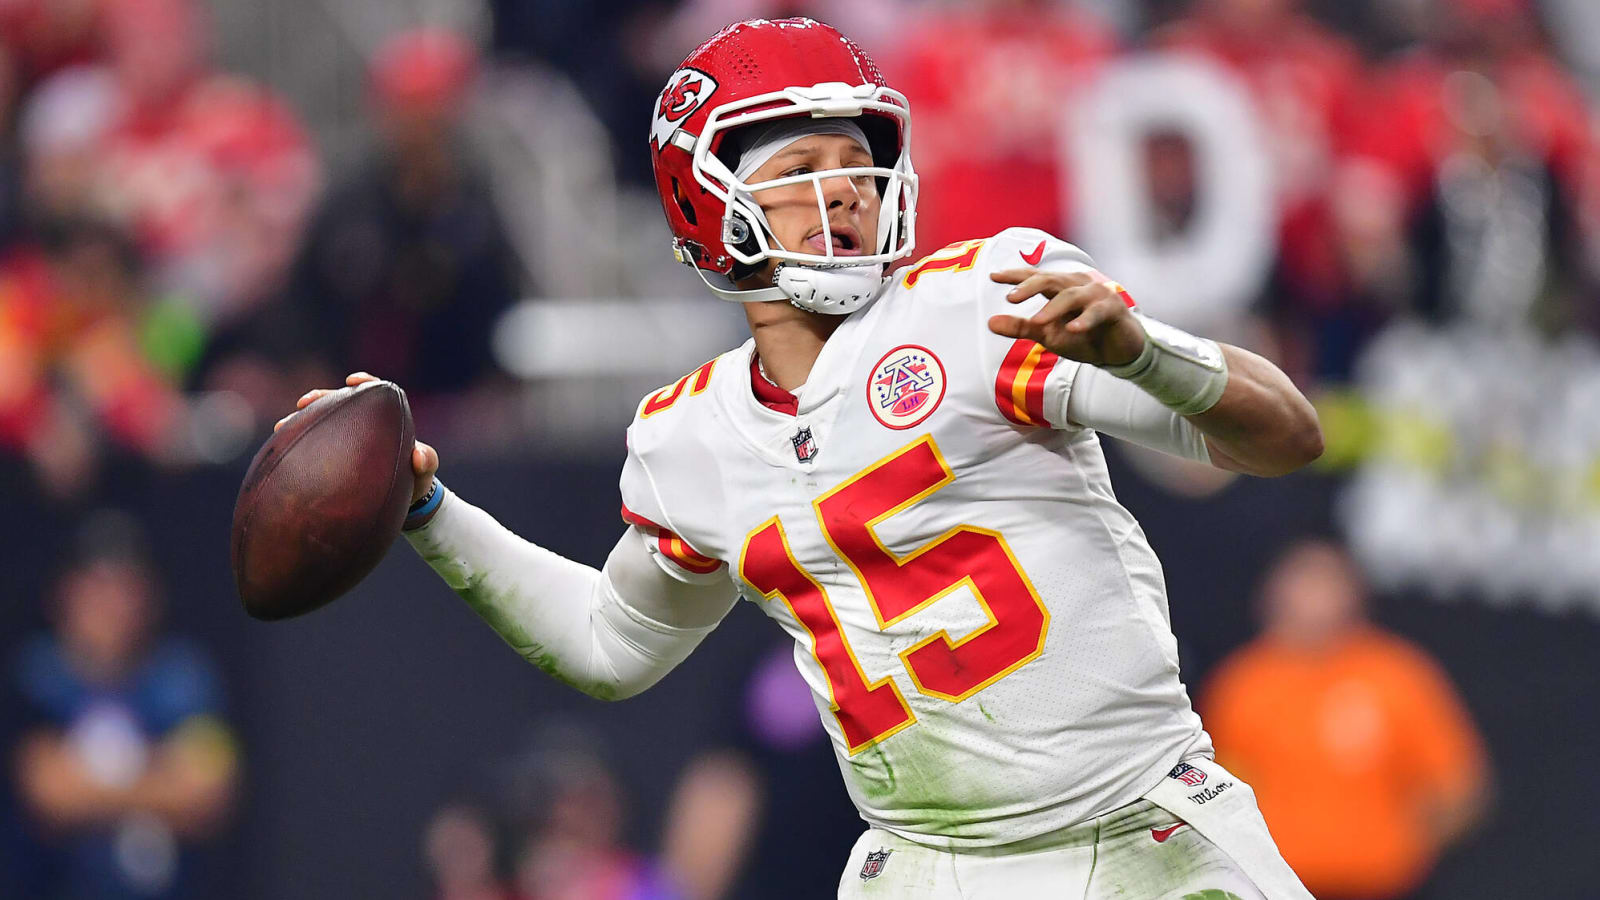 Mahomes passes Brees for most single-season offensive yards